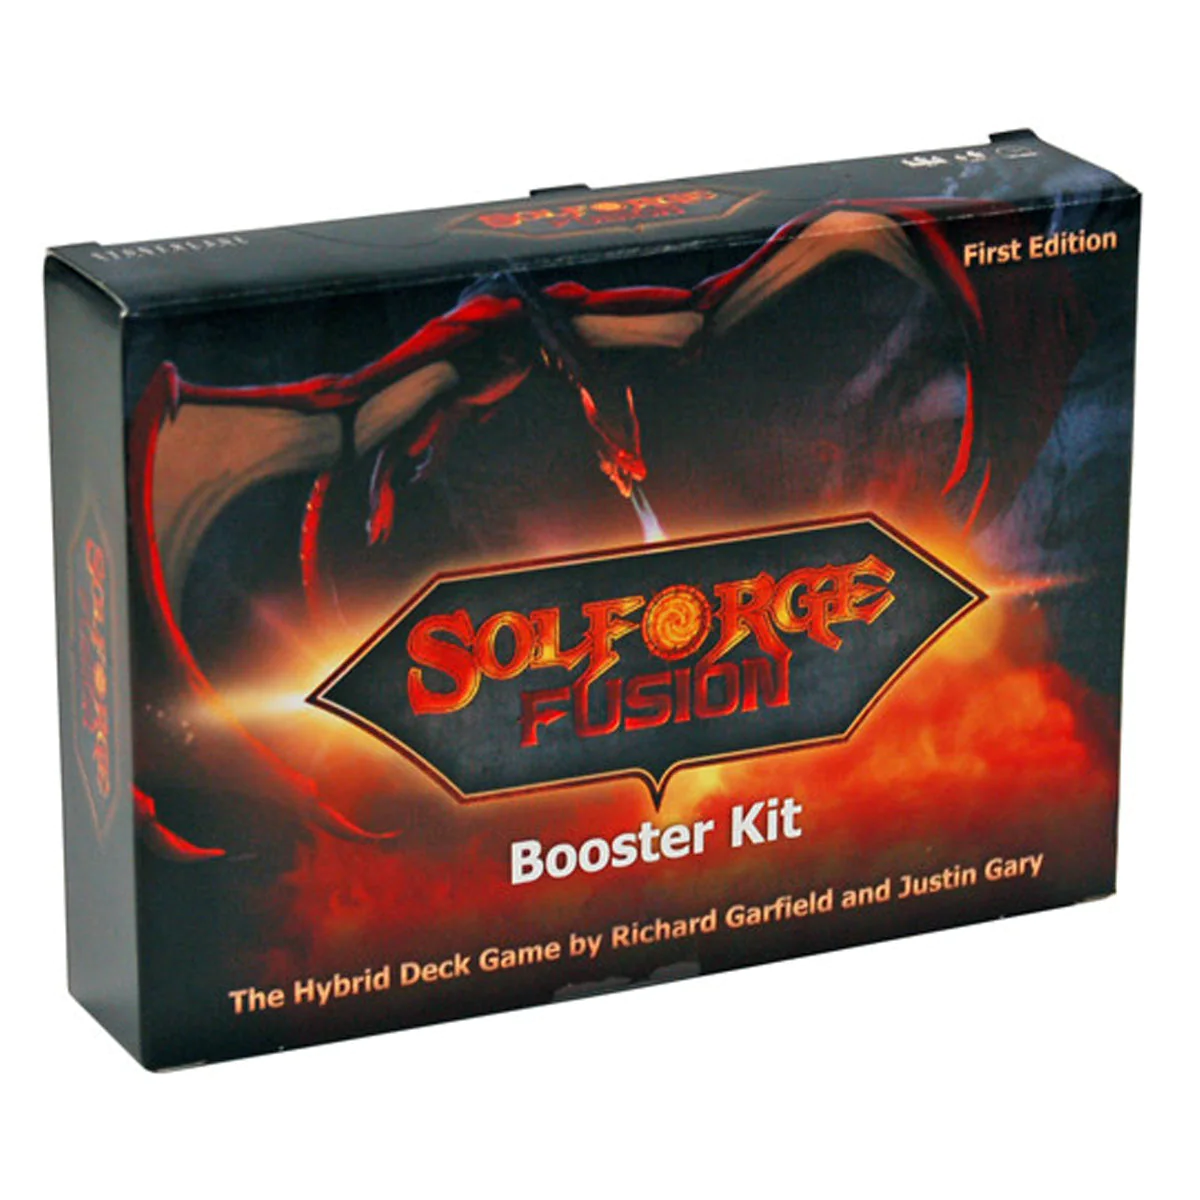 Solforge Fusion Set 1 Booster Kit